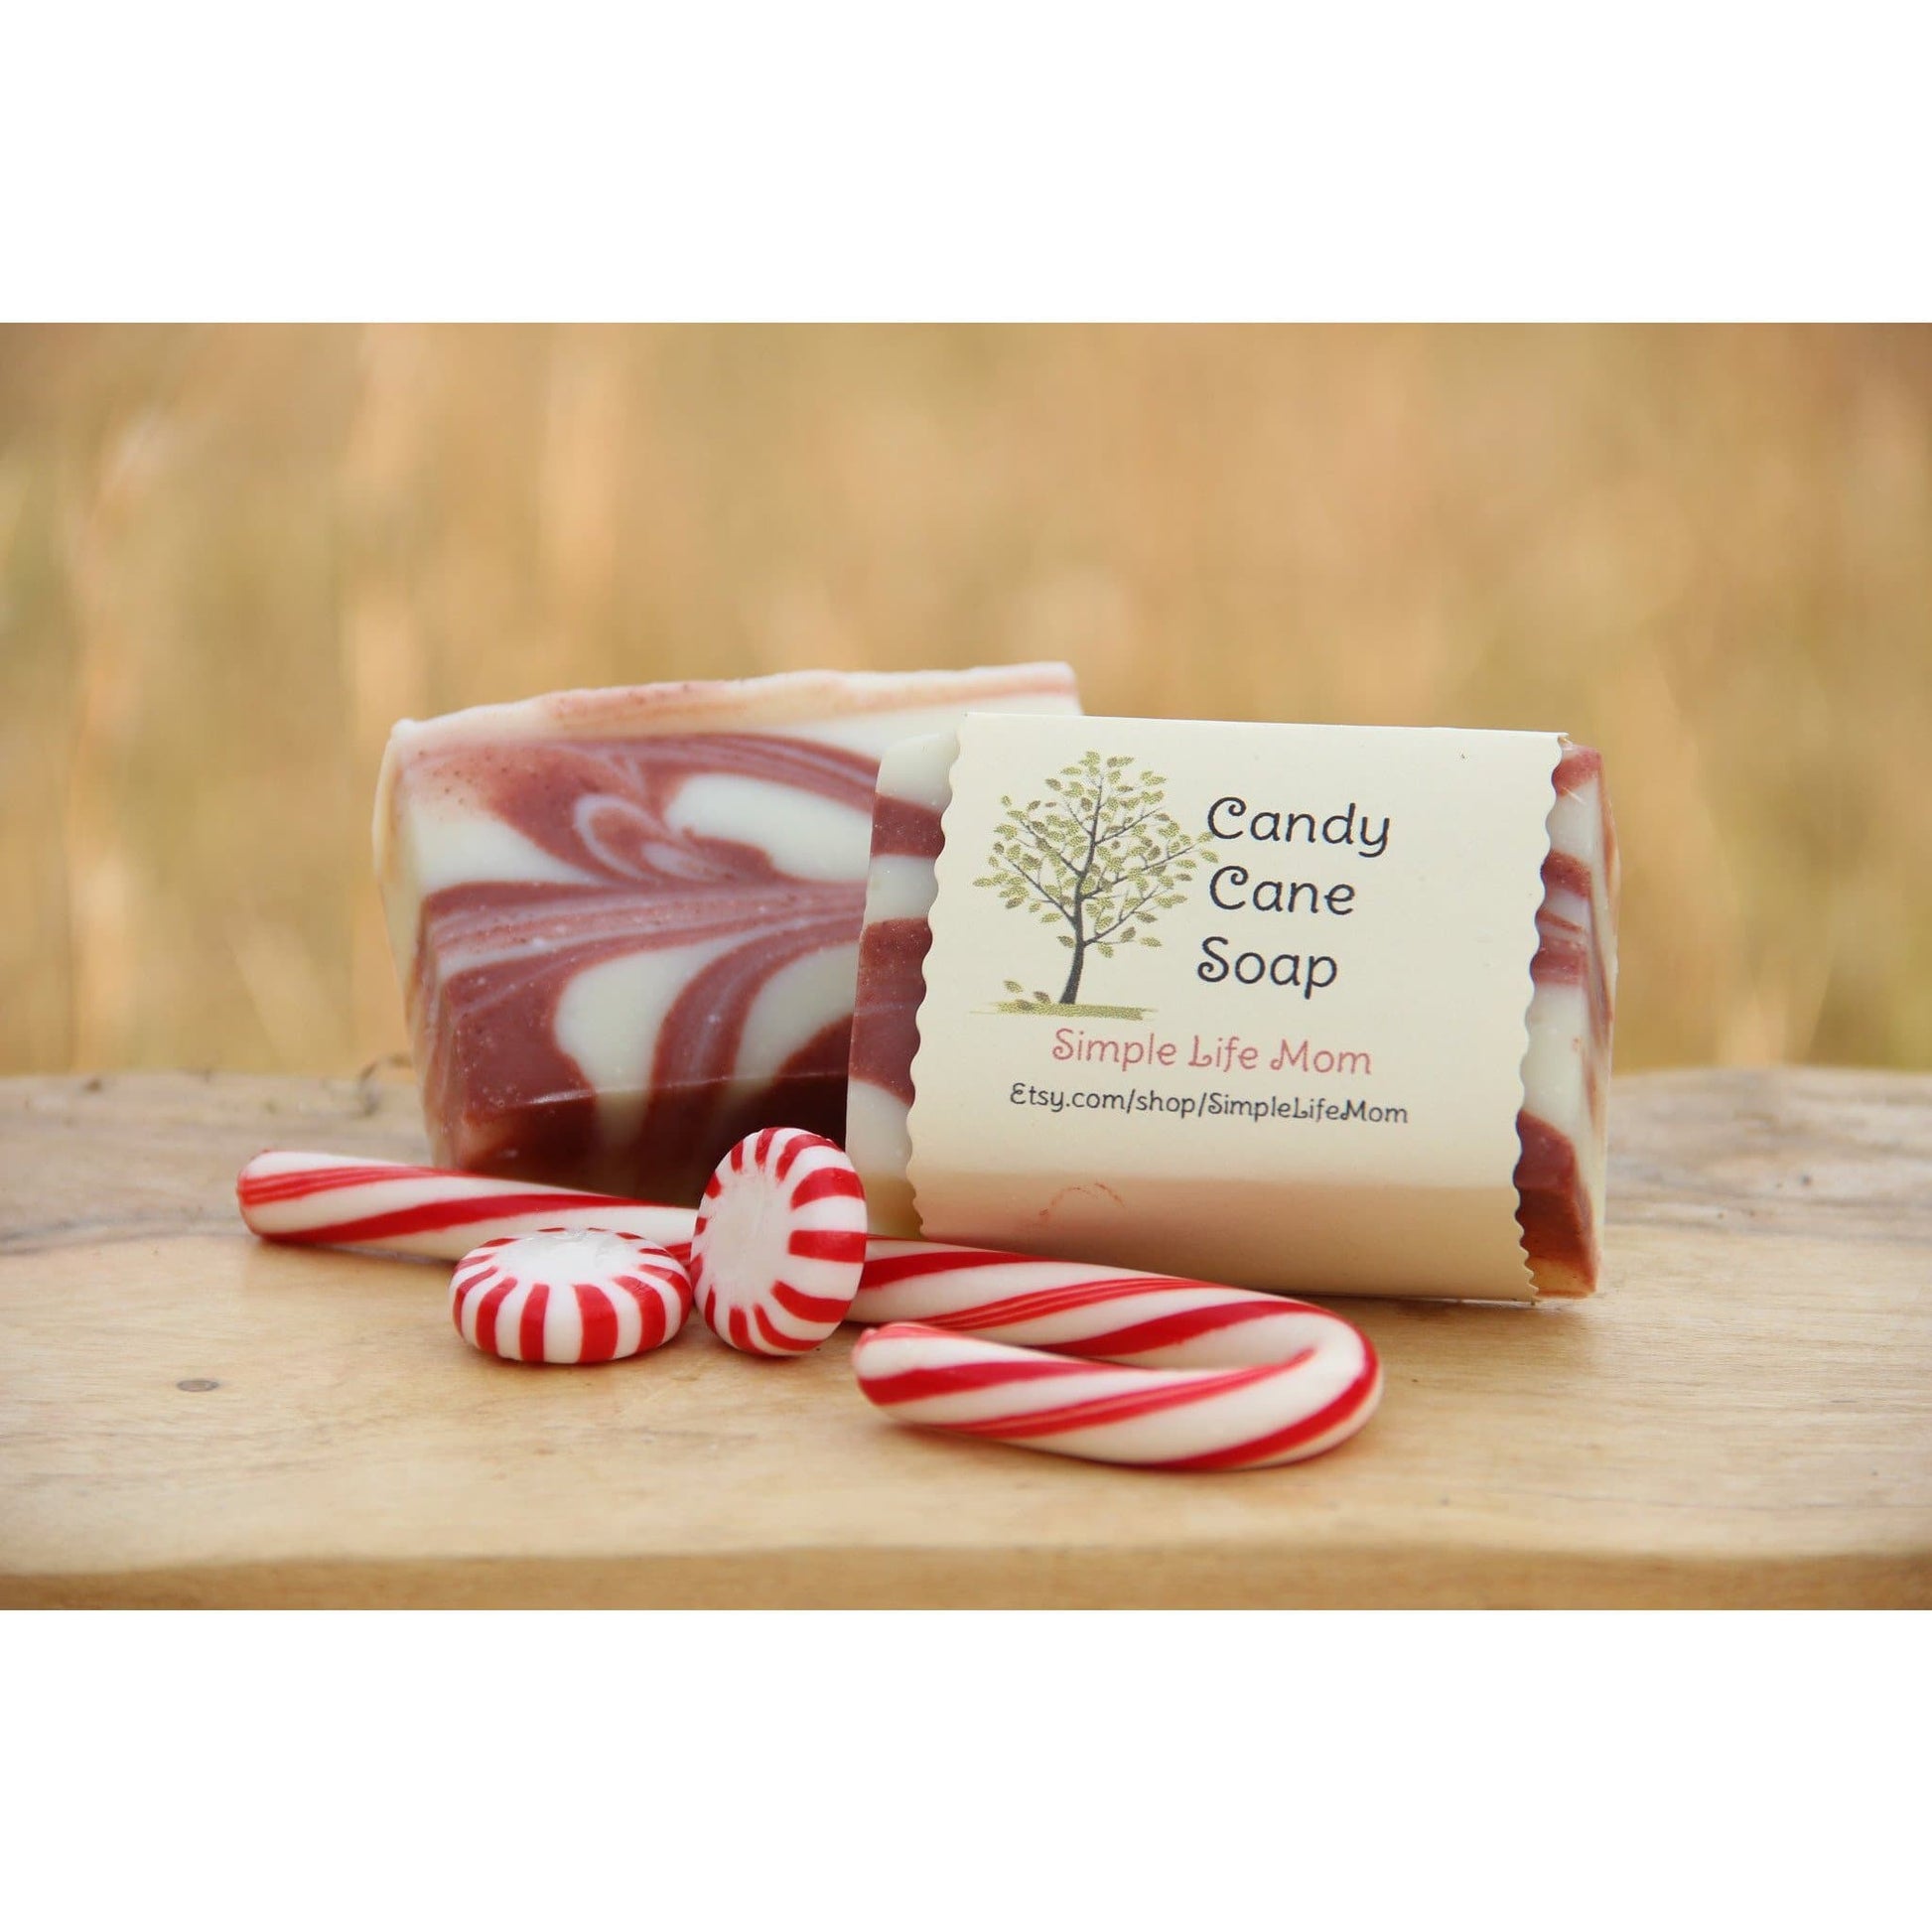 Simple Life Mom - Candy Cane Soap 4oz.